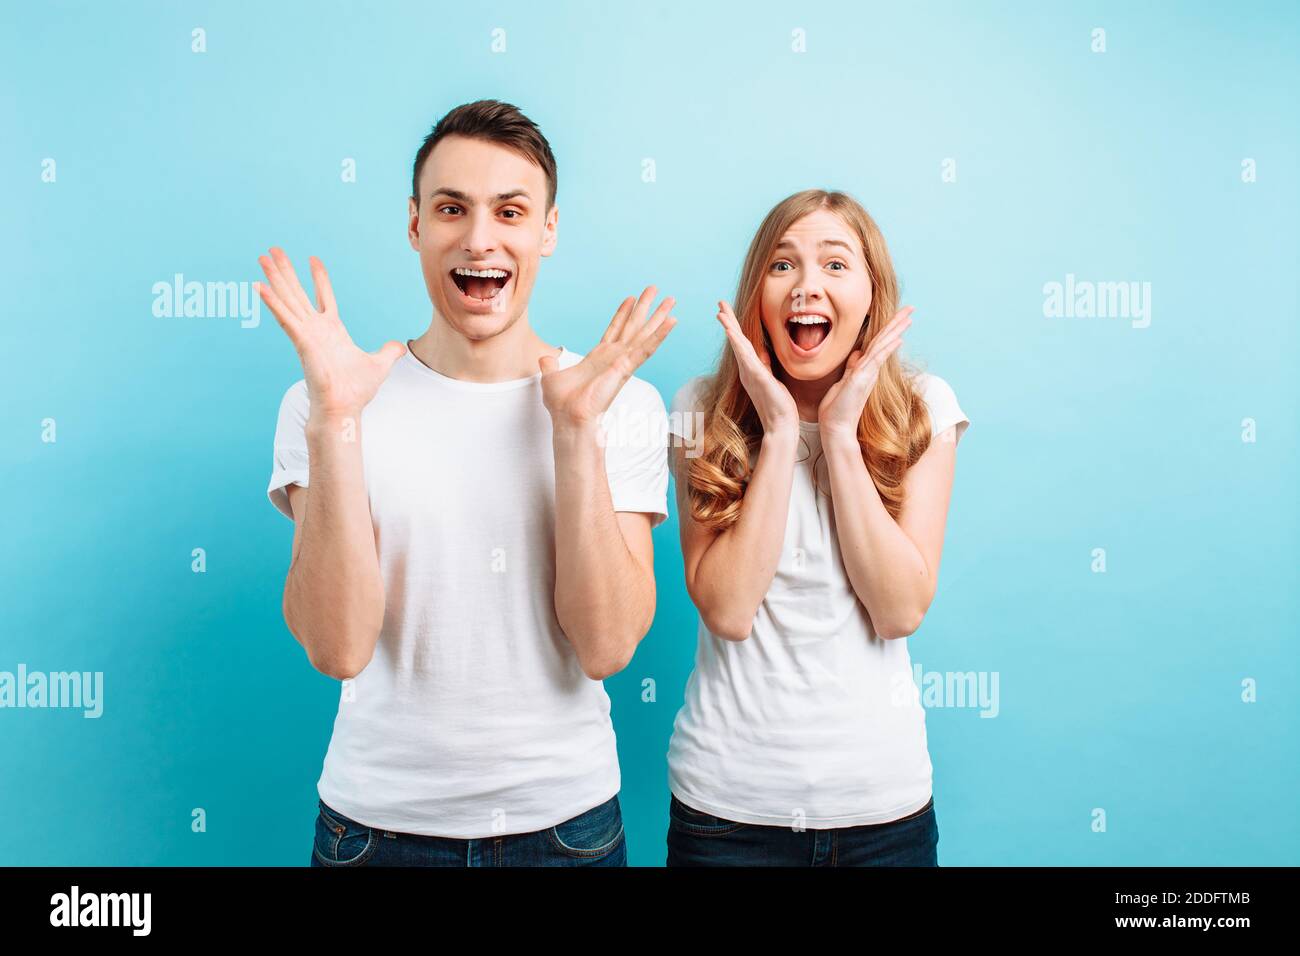 Photo of an emotional pair of a man and a woman in white T-shirts screaming with surprise or delight and raising their hands against a blue background Stock Photo